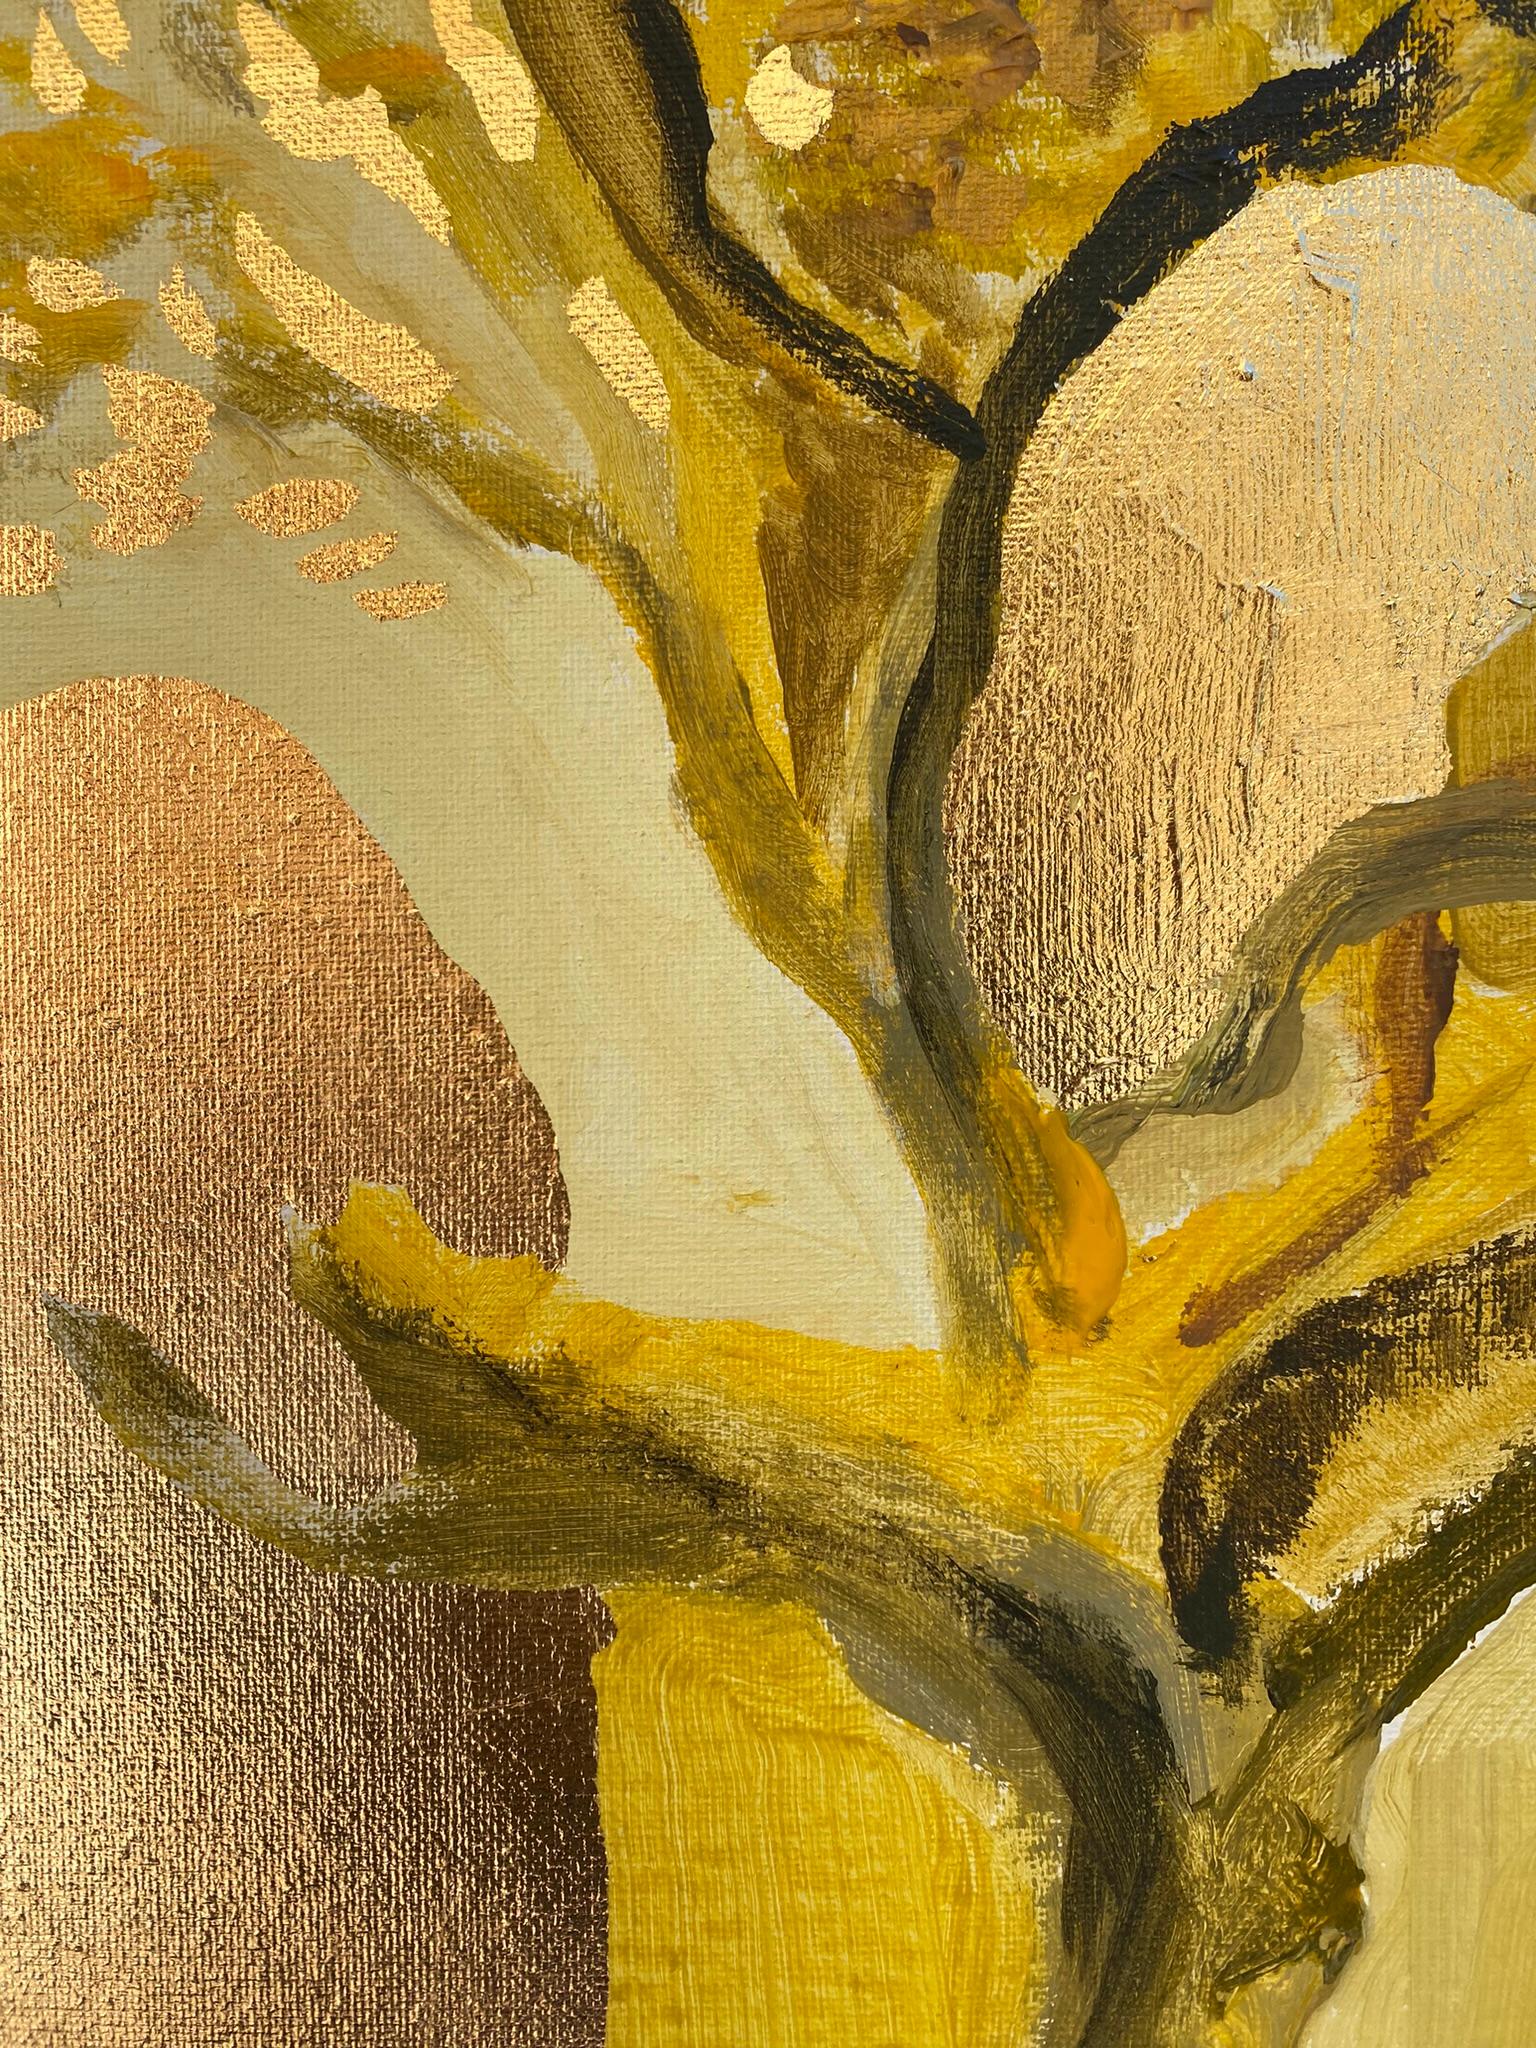 Original-Primary Yellow-Sunlit-Abstract-Expression-Gold Leaf-UK Awarded Artist 5